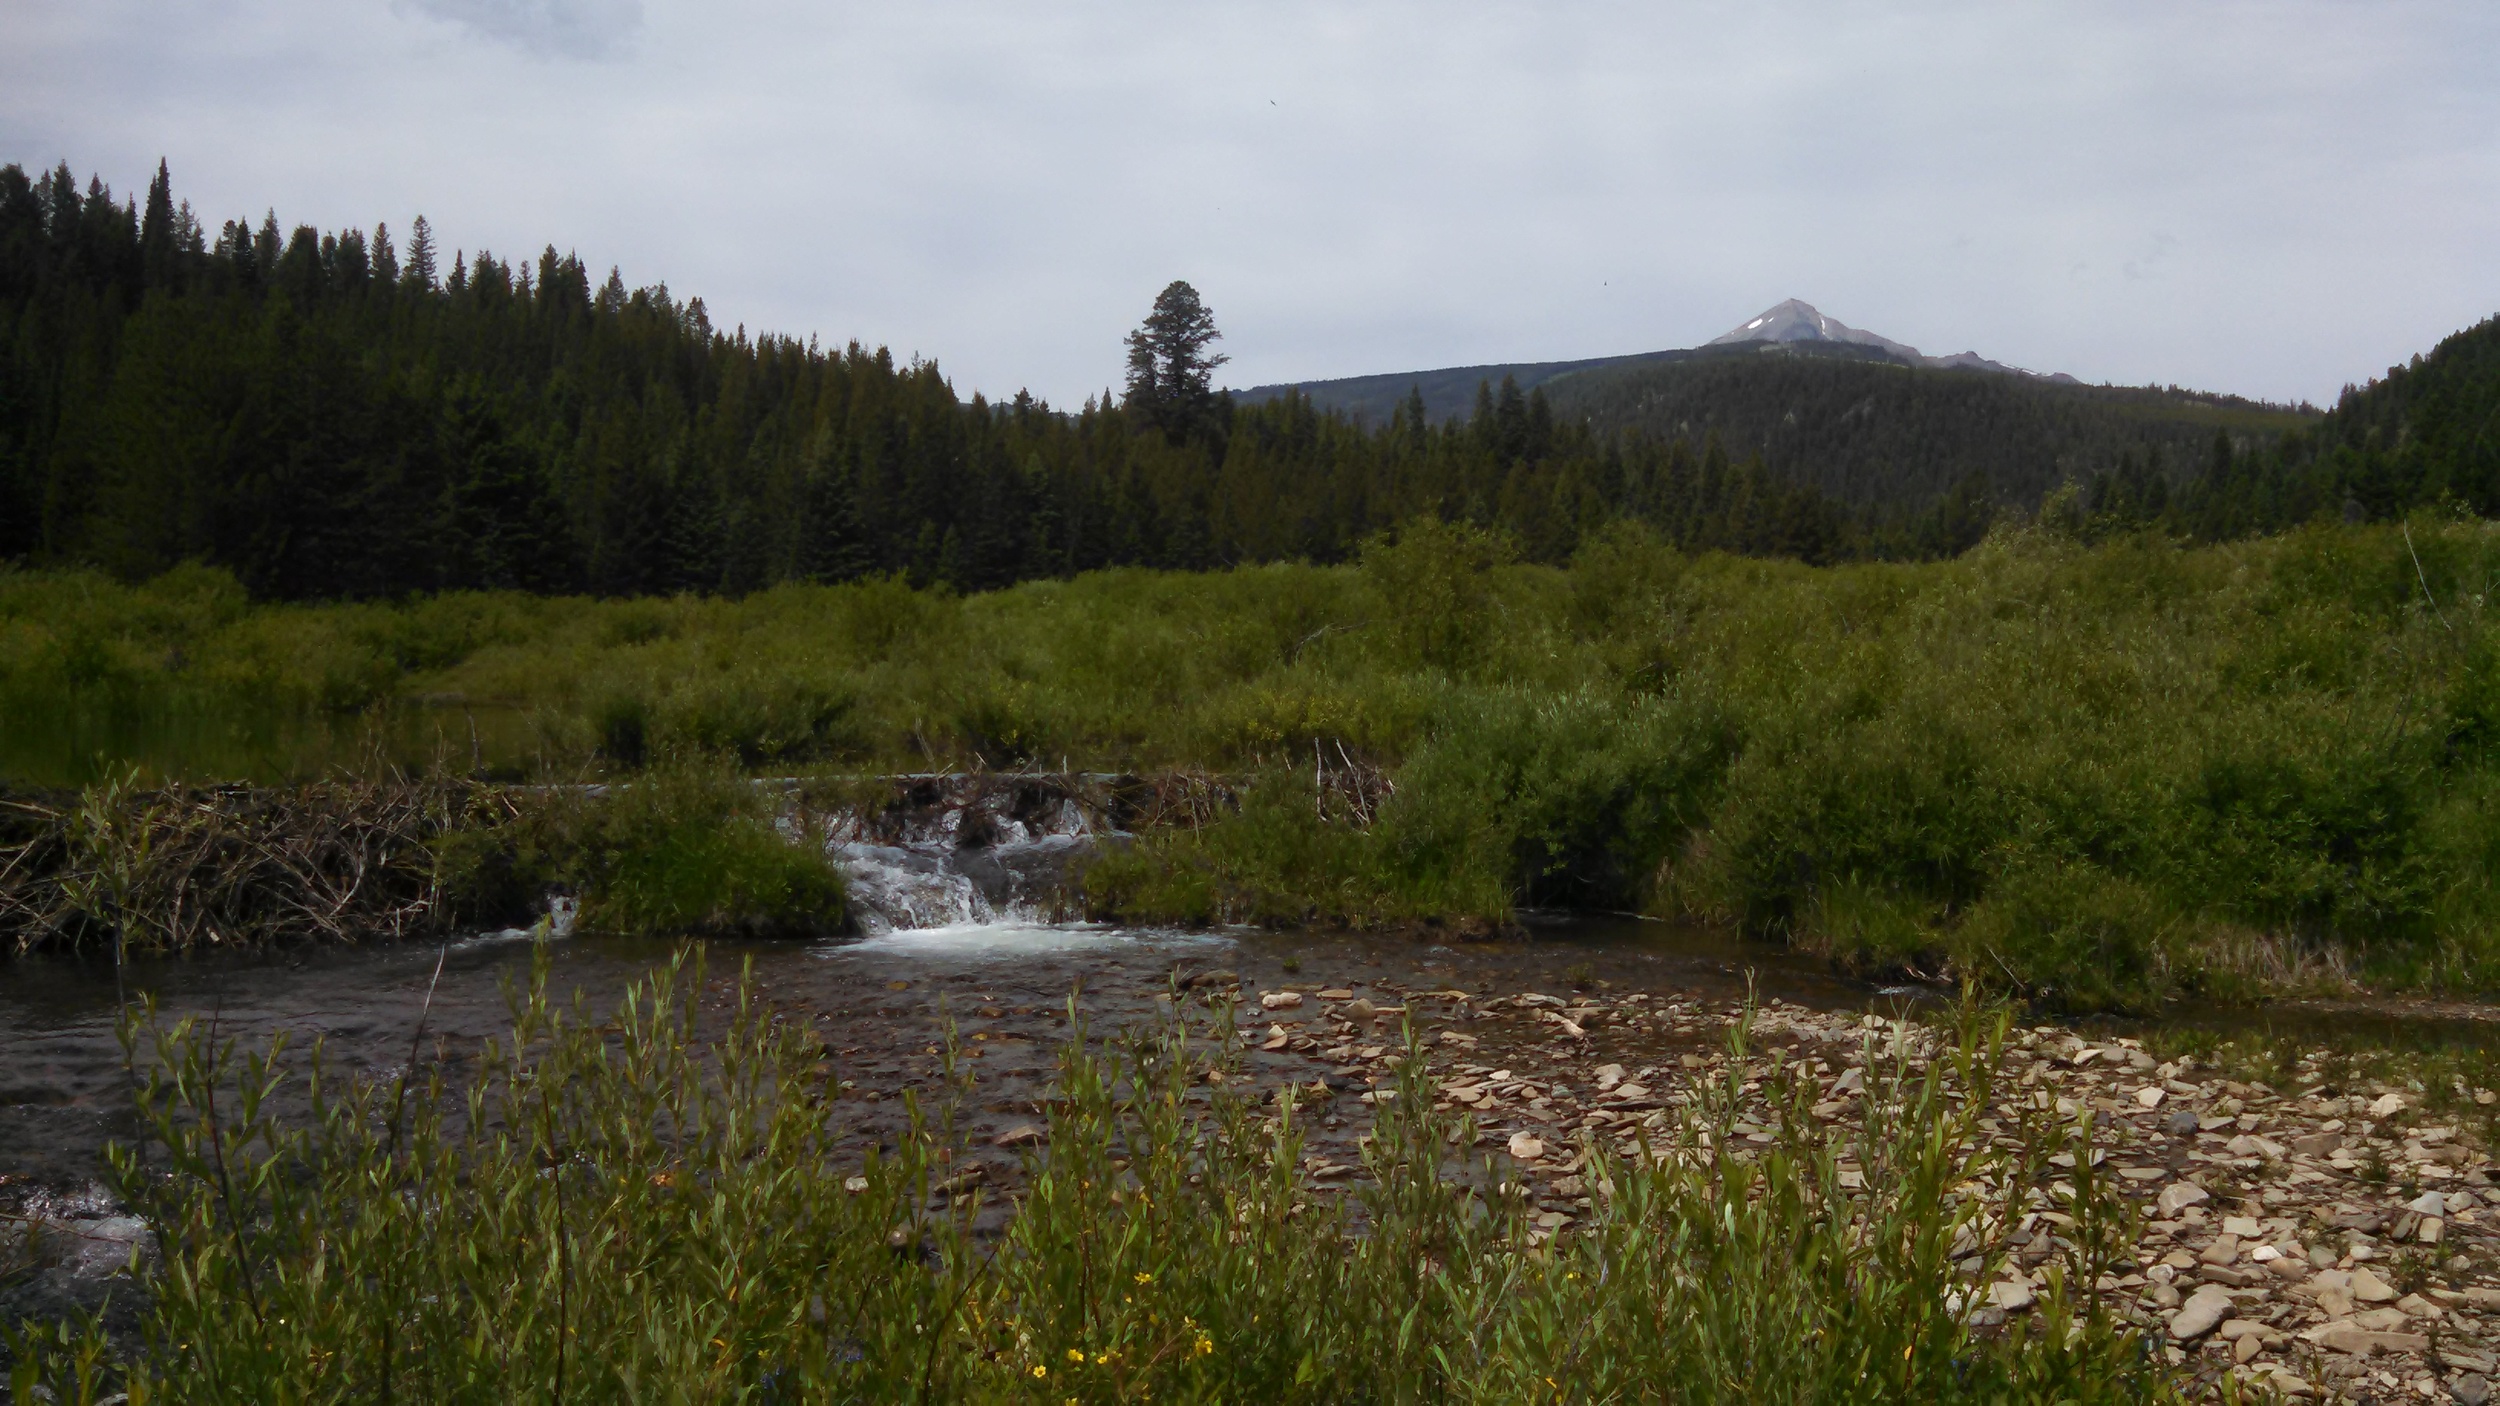  Beaver dam on the West Fork of the Gallatin River&nbsp; 